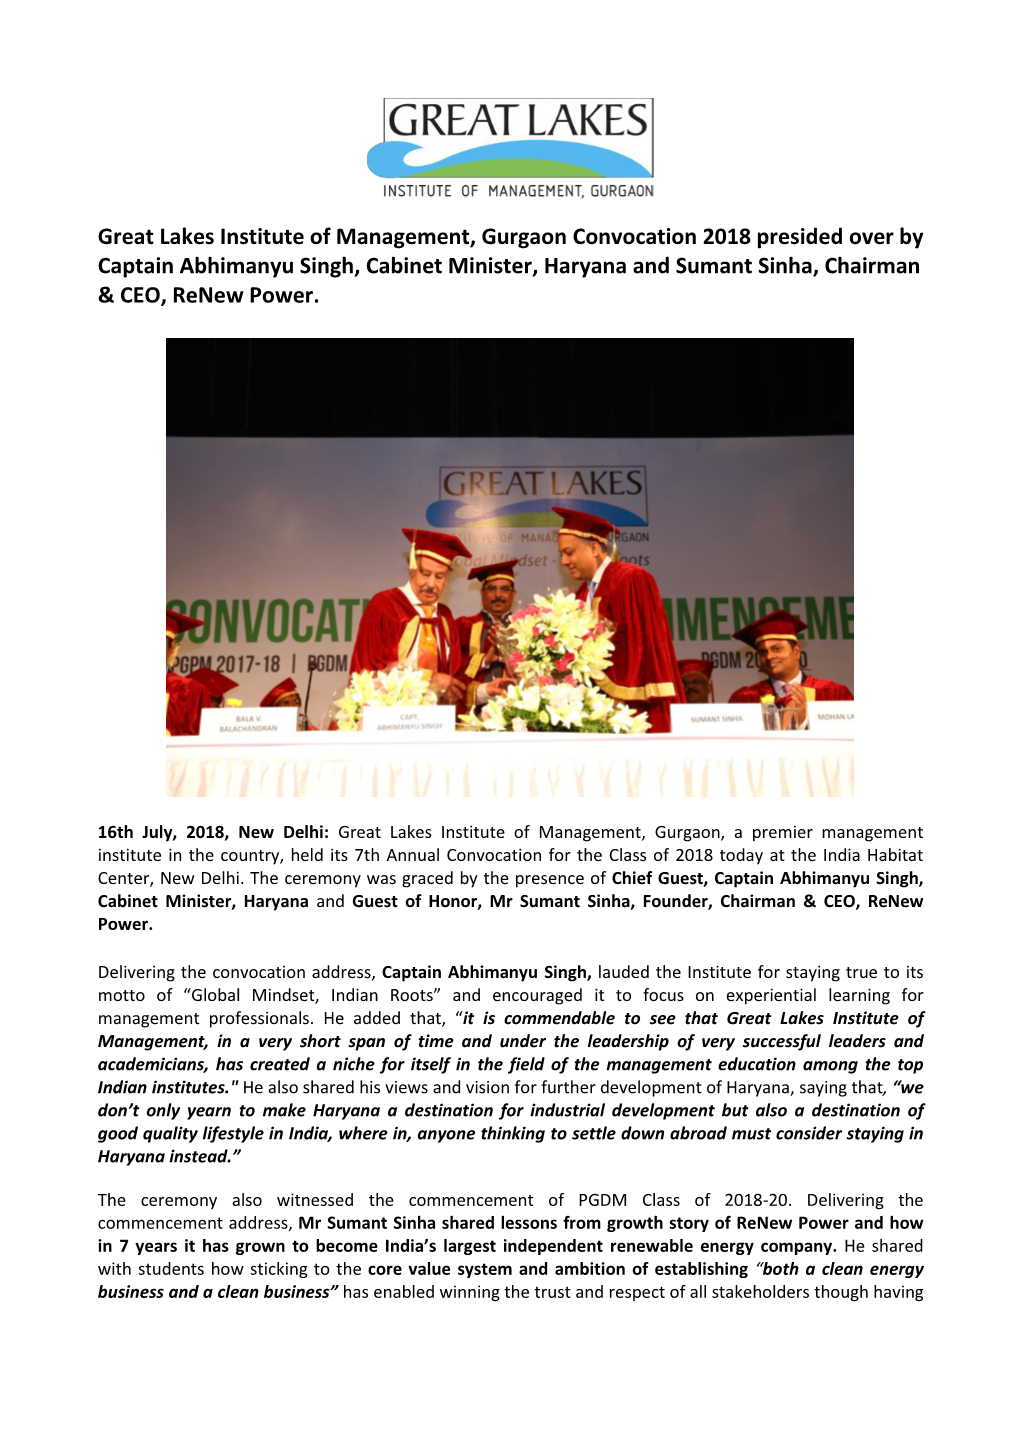 Great Lakes Institute of Management, Gurgaon Convocation 2018